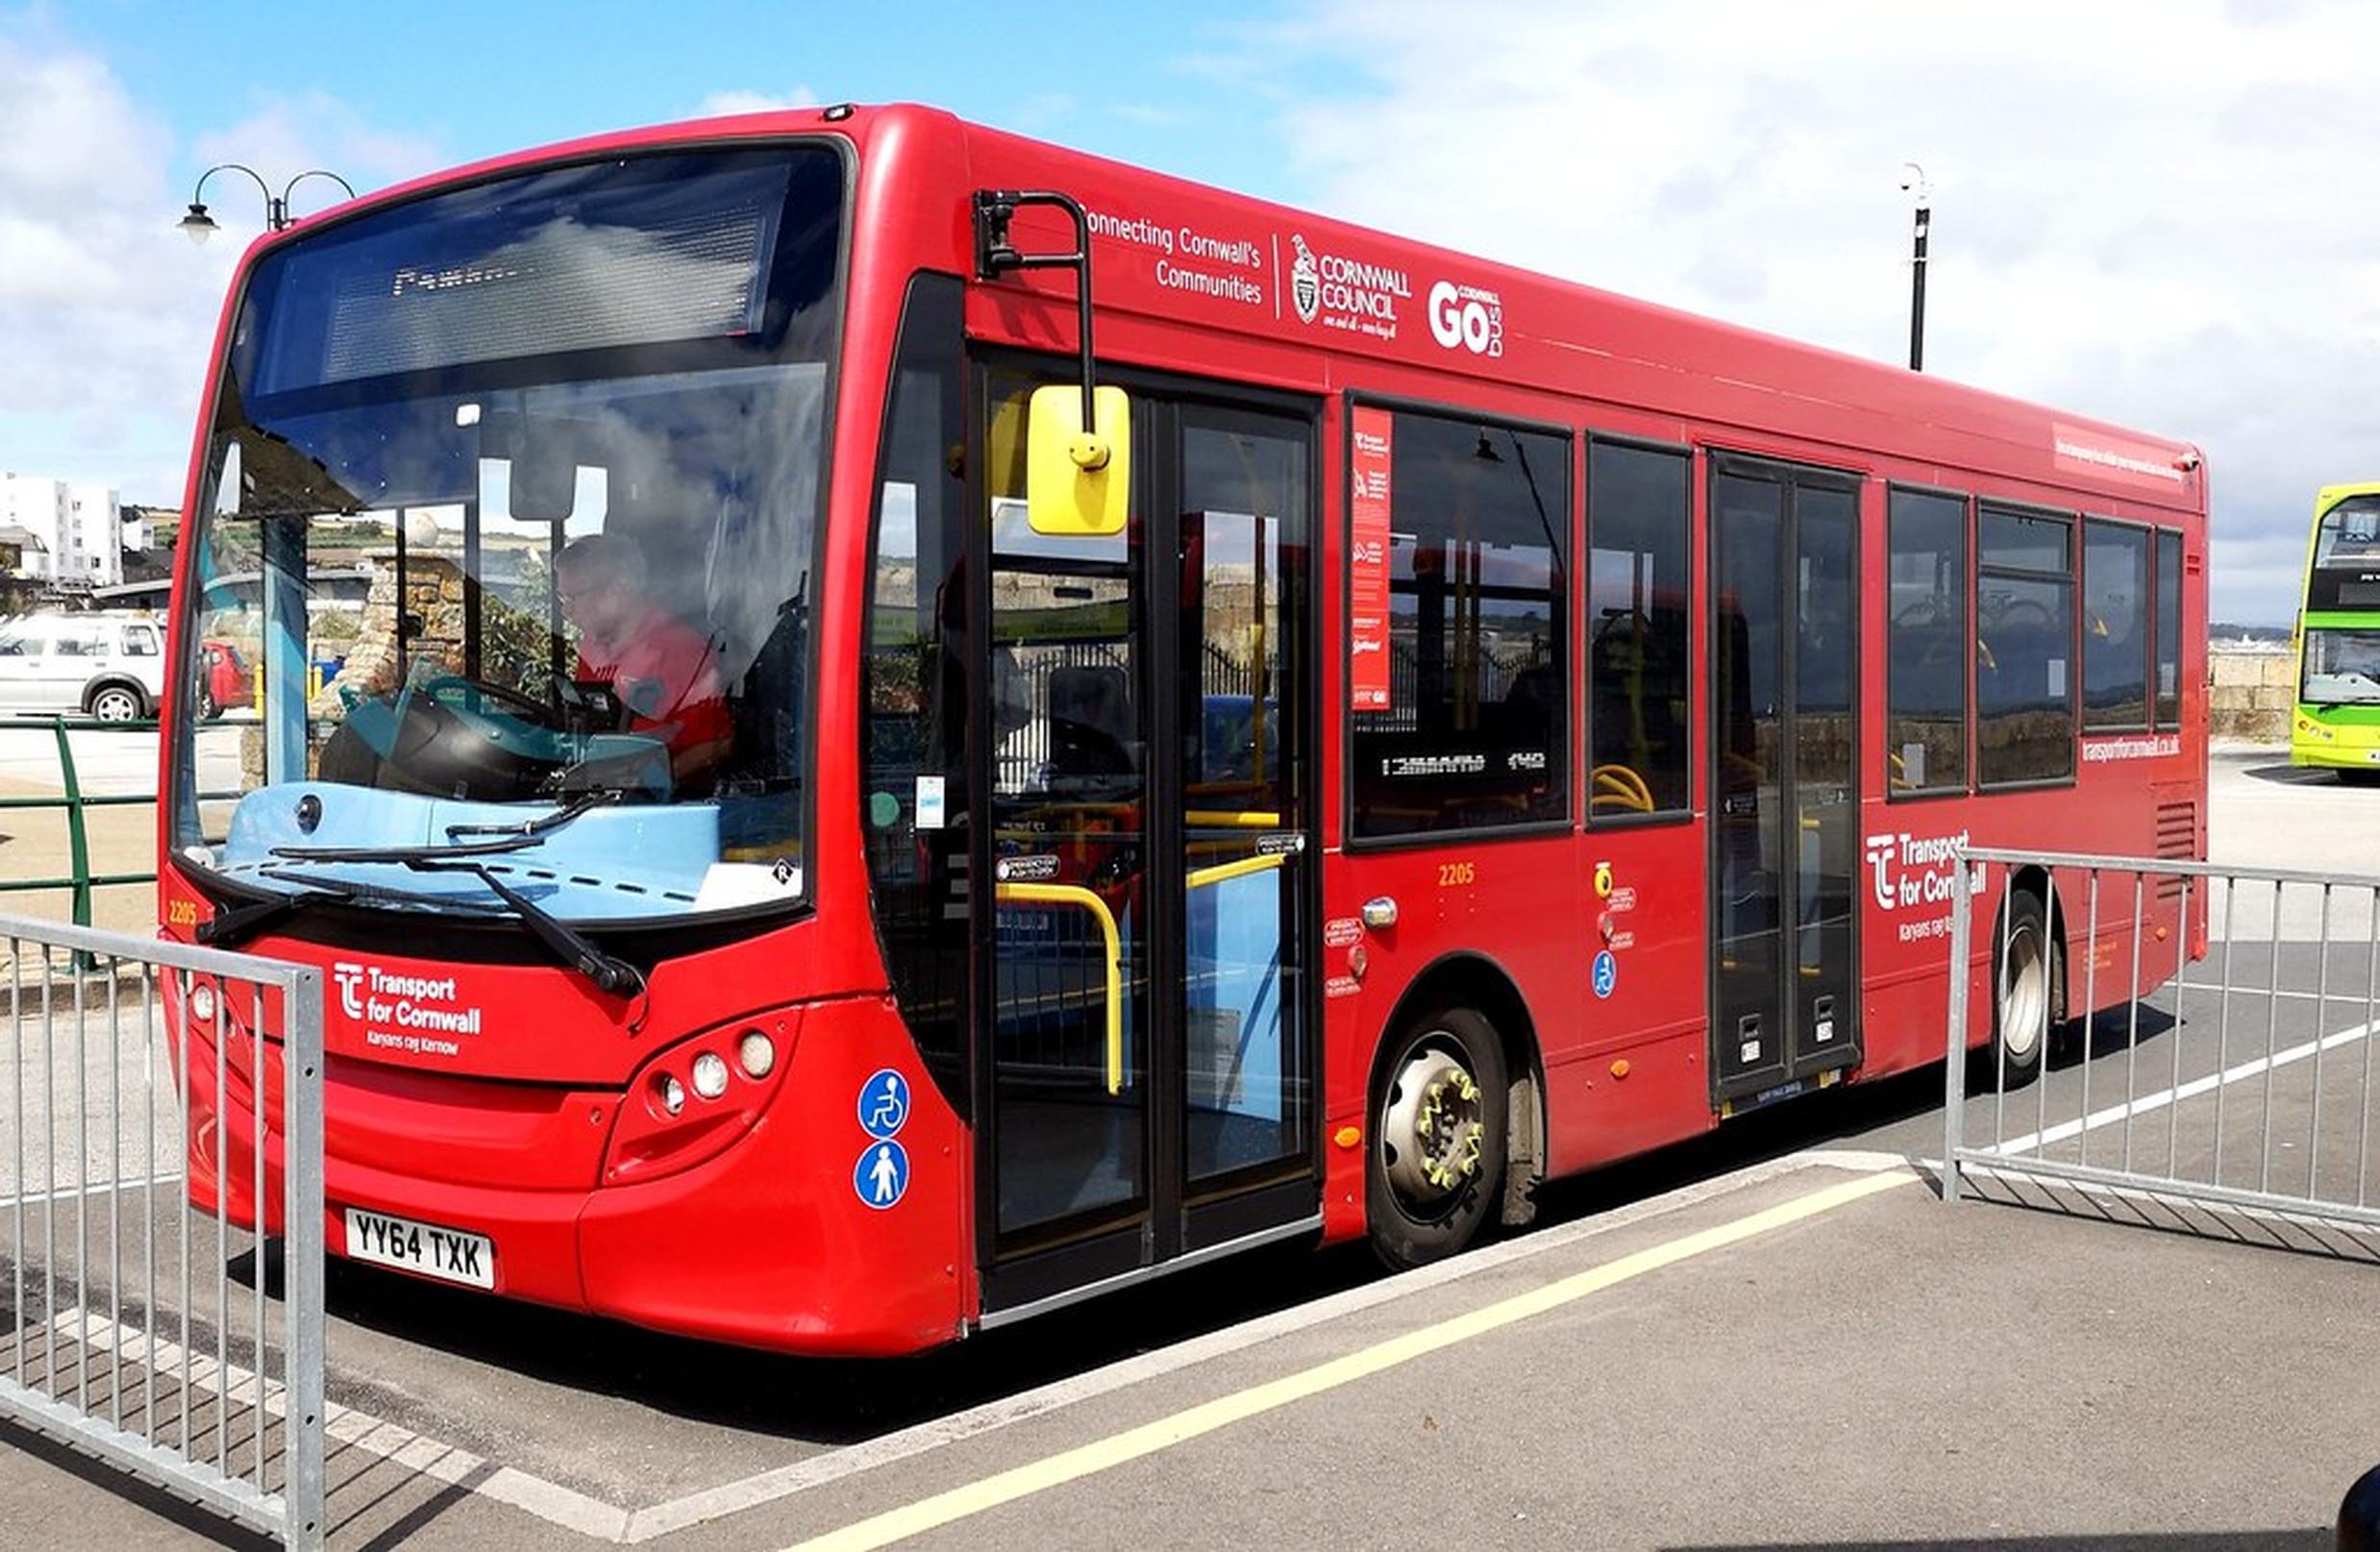 A flat-rate bus pilot scheme in Cornwall has resulted in a 10% rise in passengers, says the DfT